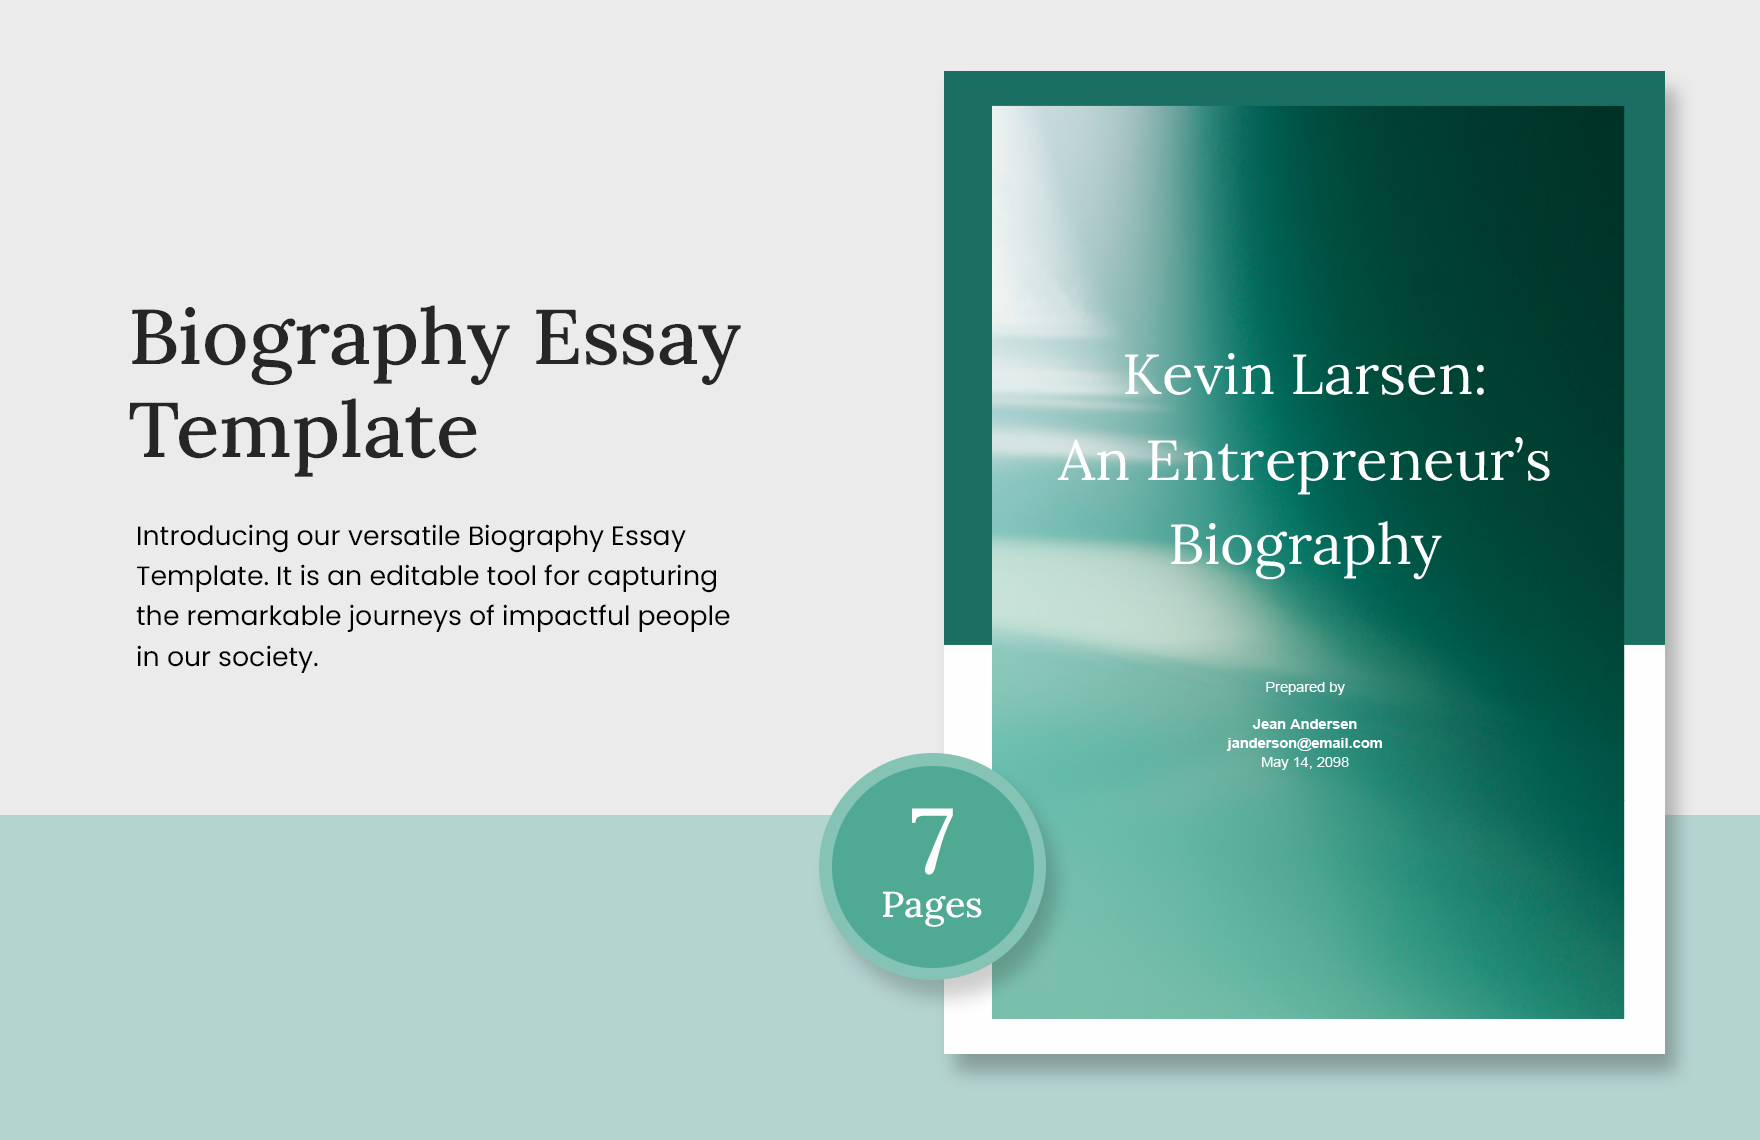 Biography Essay Template